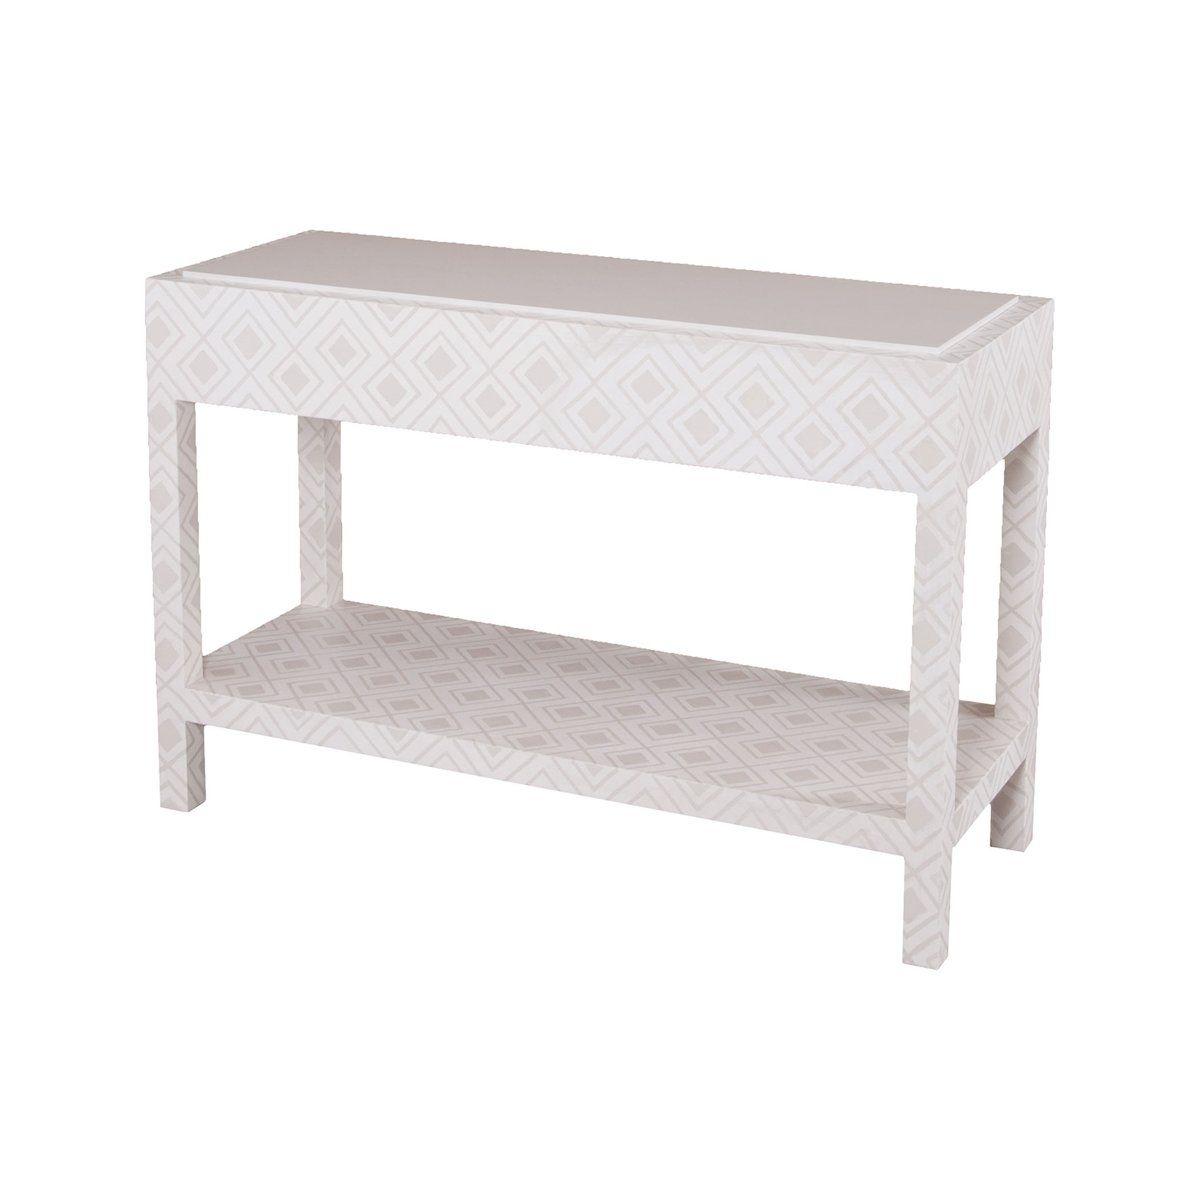 Kent Fabric Wrapped Console | Products In 2018 | Pinterest In Parsons Grey Marble Top & Elm Base 48x16 Console Tables (View 20 of 30)